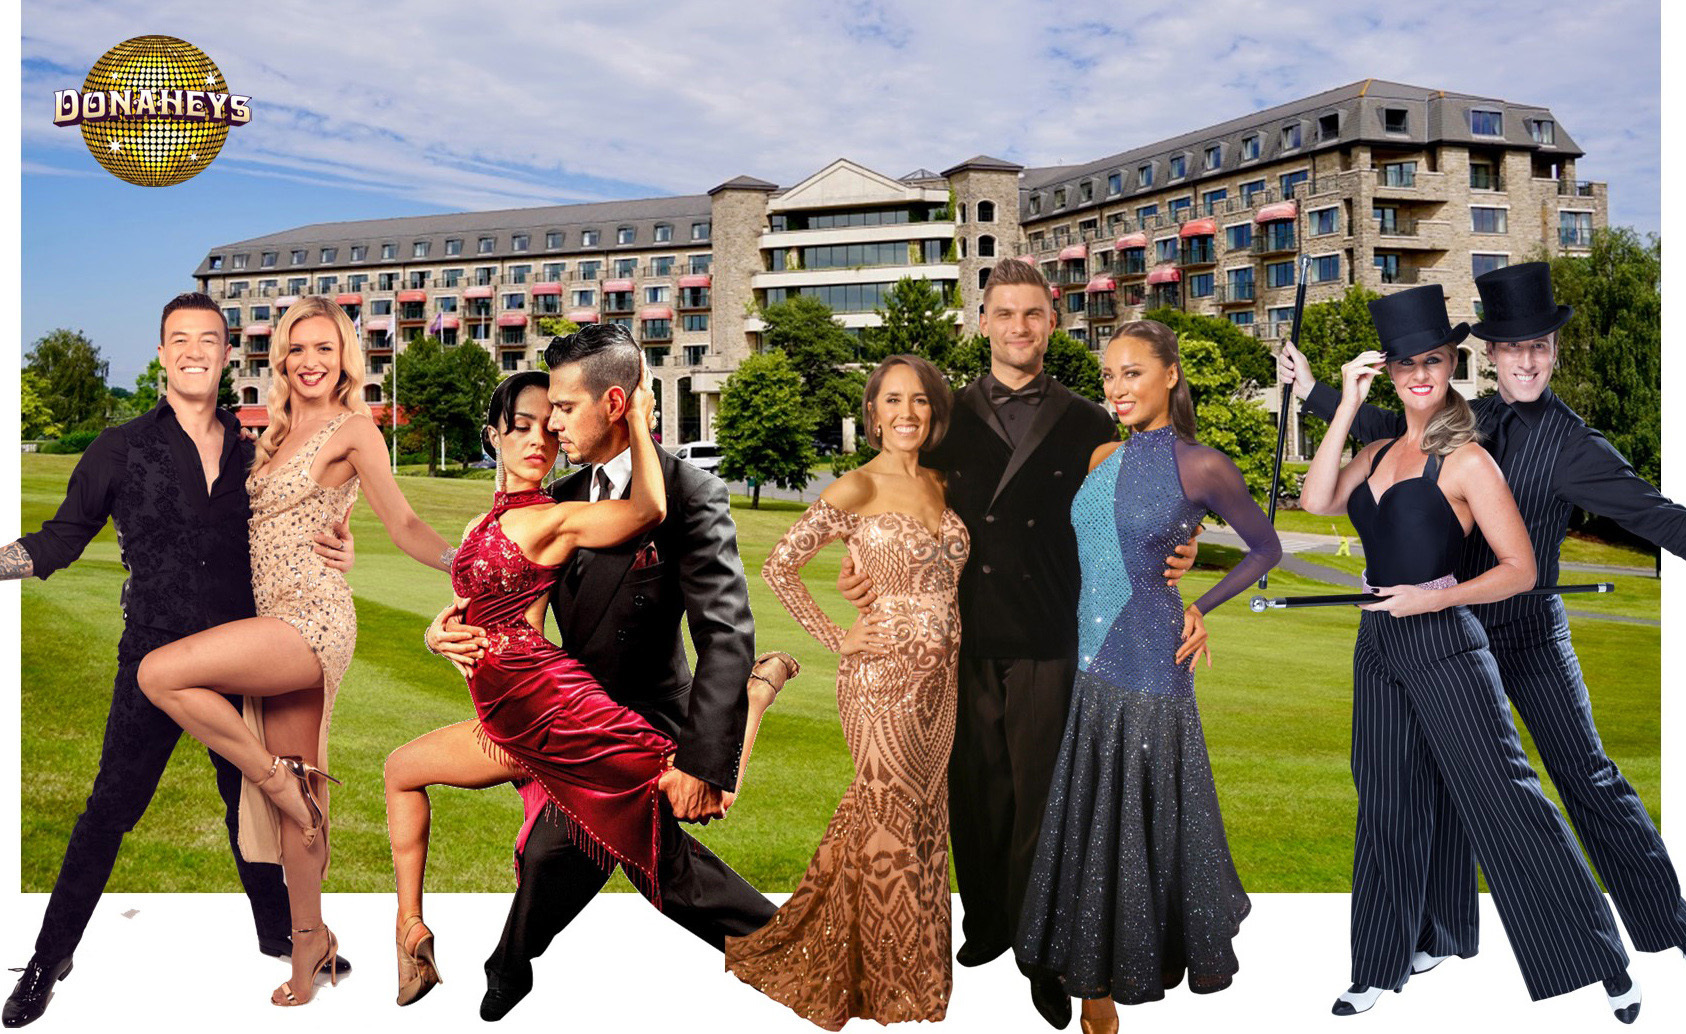 Donaheys Dancing With The Stars Weekend, Wales, Newport, Wales, United Kingdom